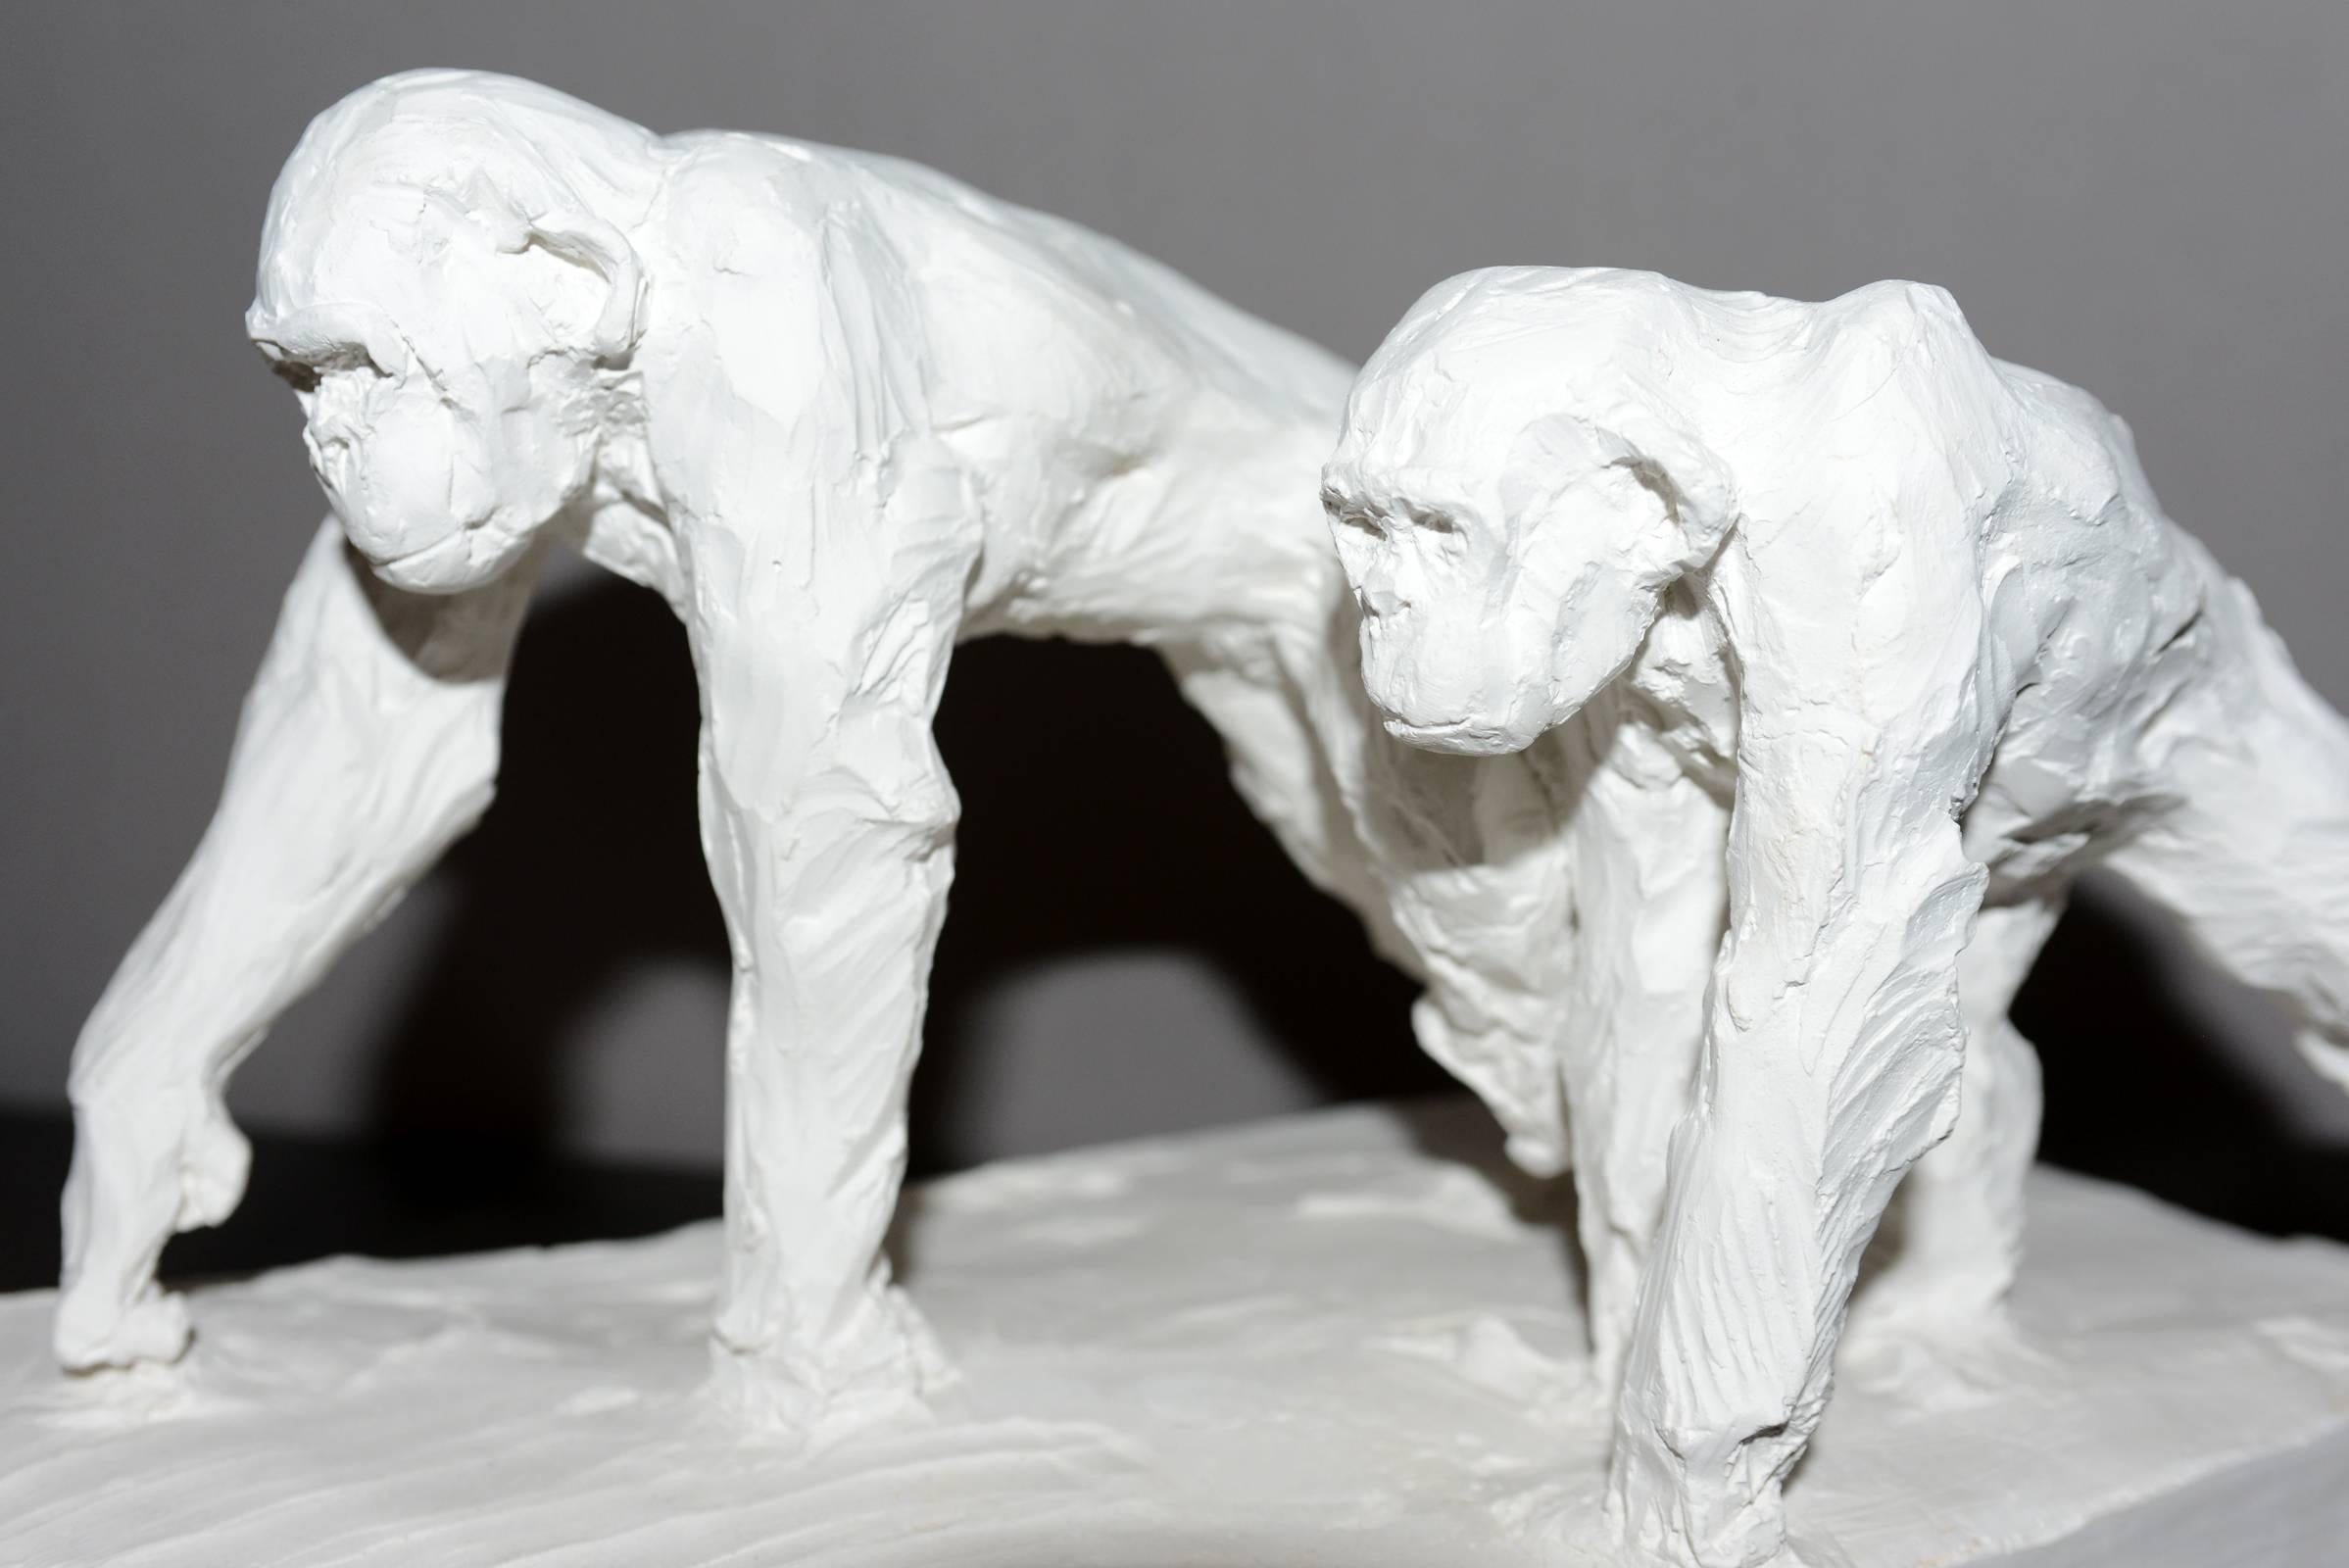 Contemporary Sculpture Double Chimpanzee in Plaster Limited Edition 30/50 by J.B Vandame 2015